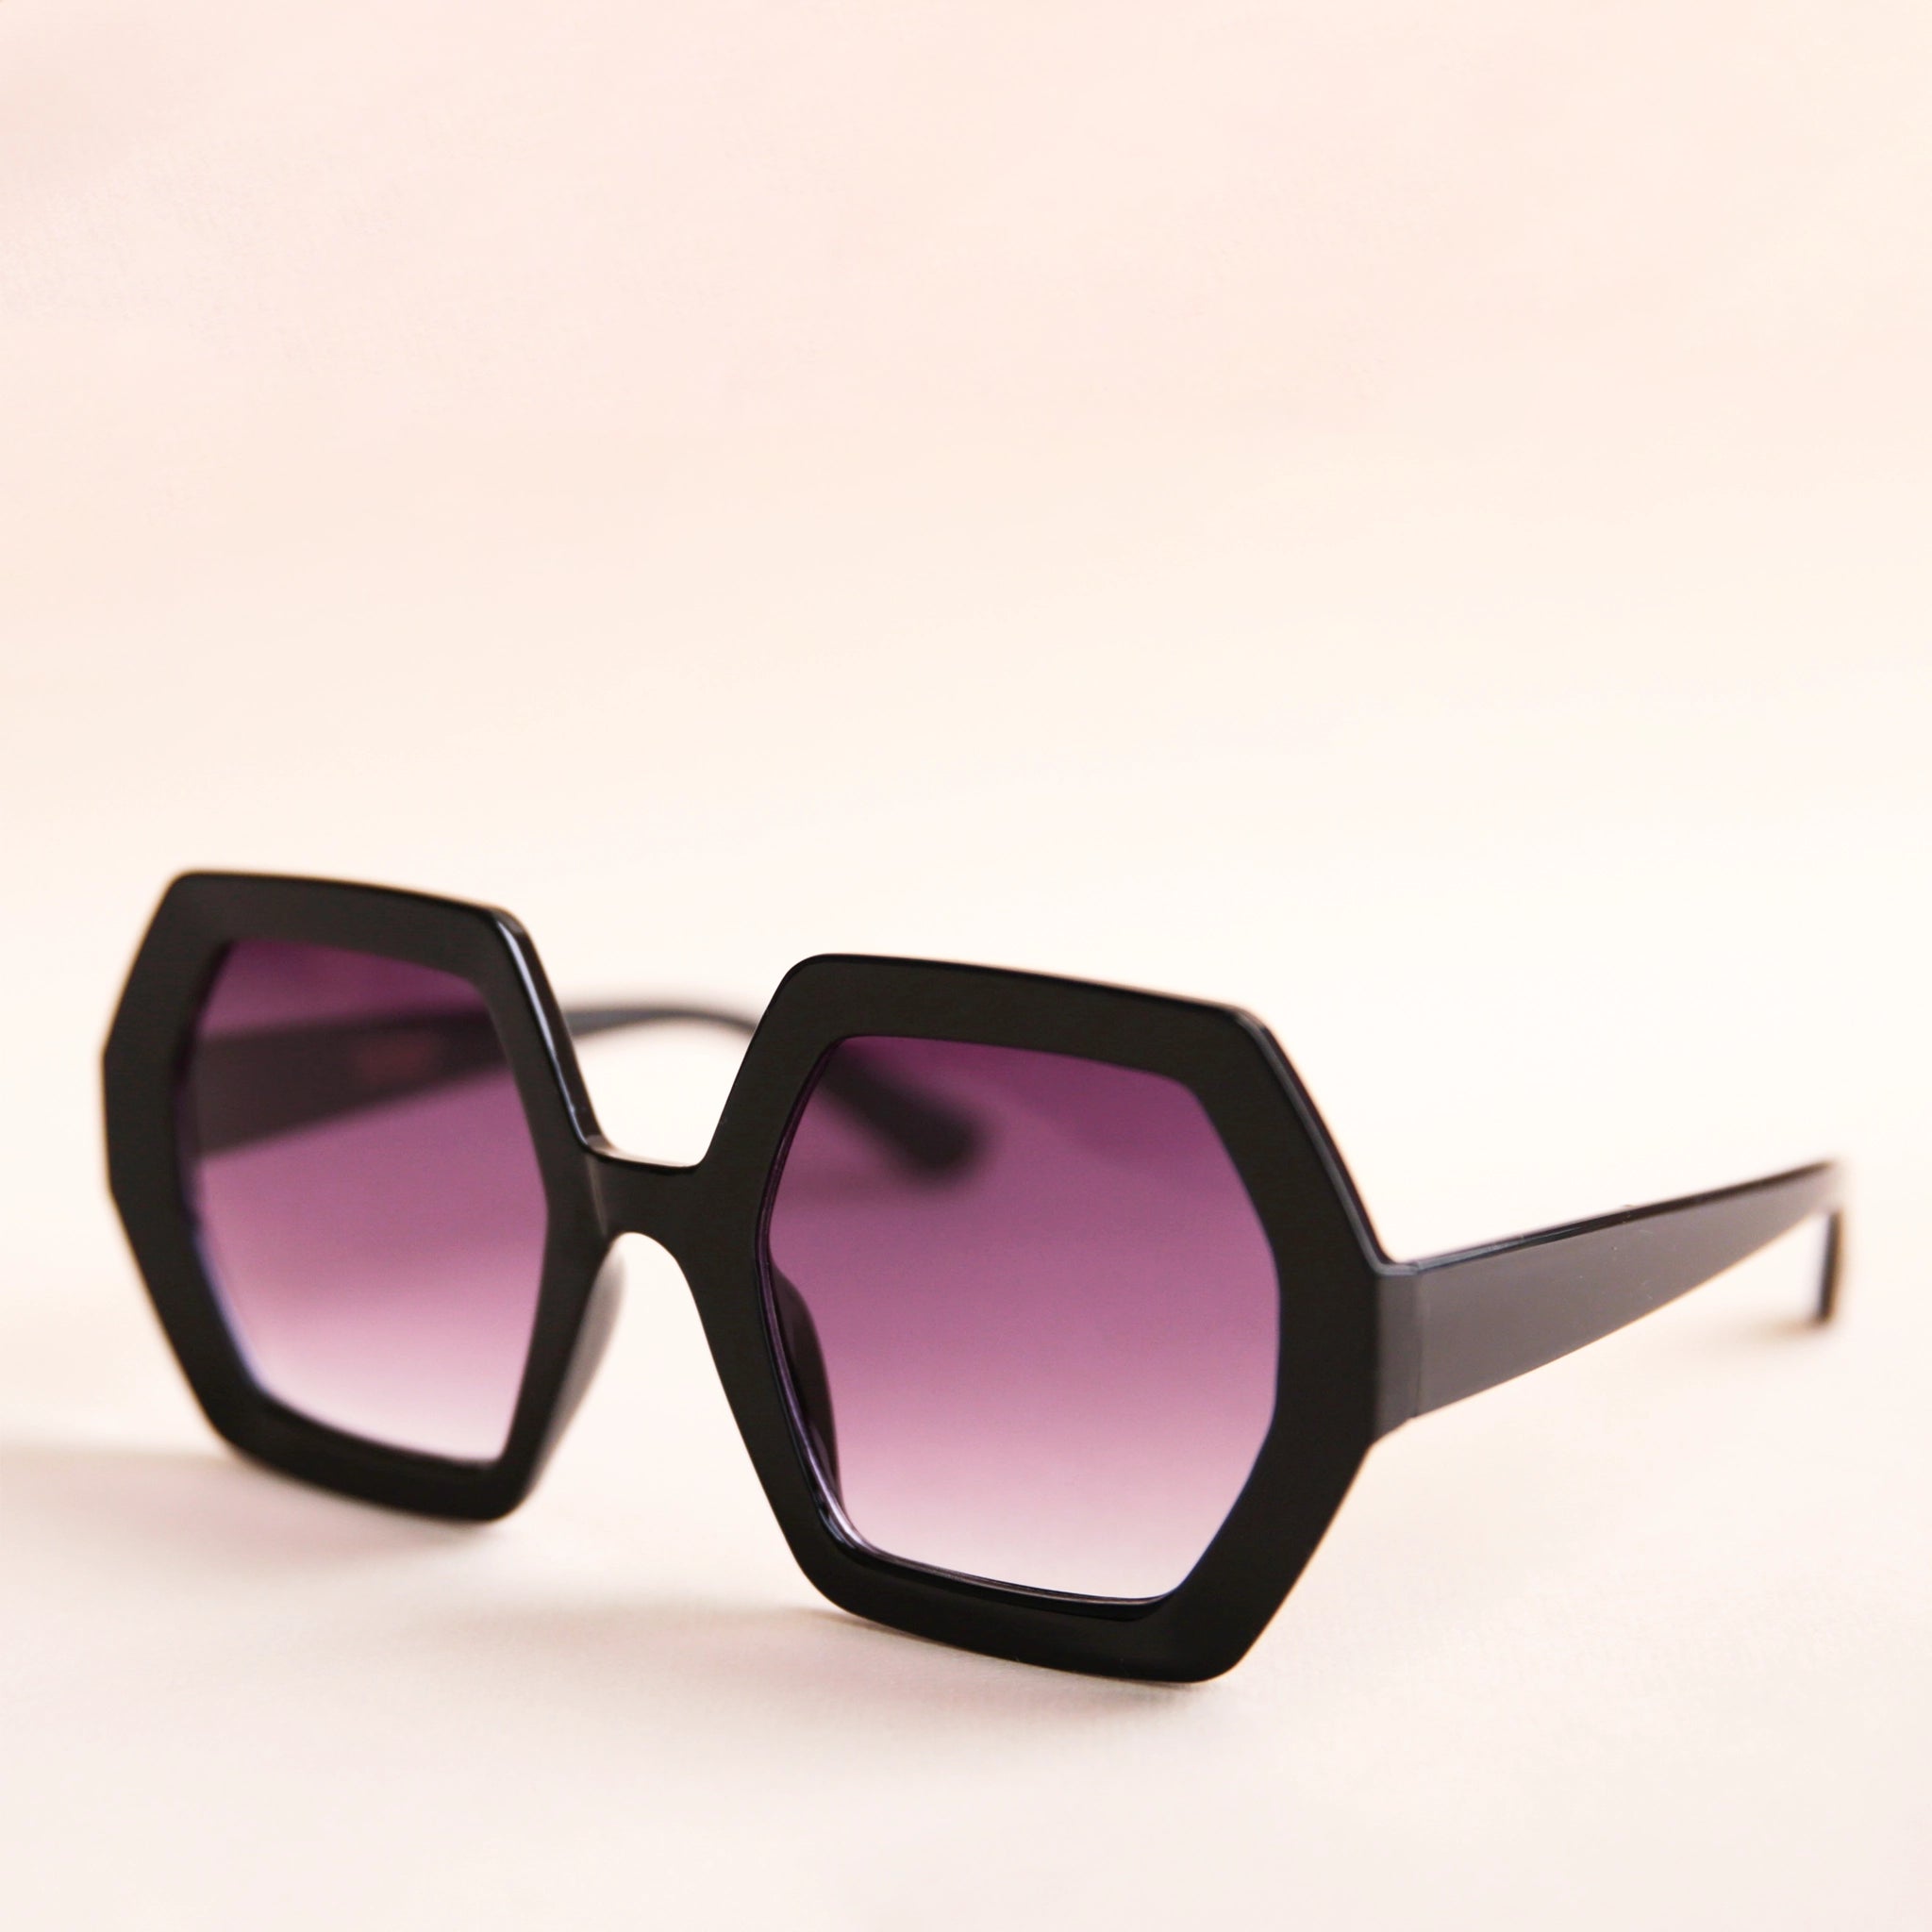 On a neutral background is a pair of hexagon shaped black sunglasses with purple lenses.